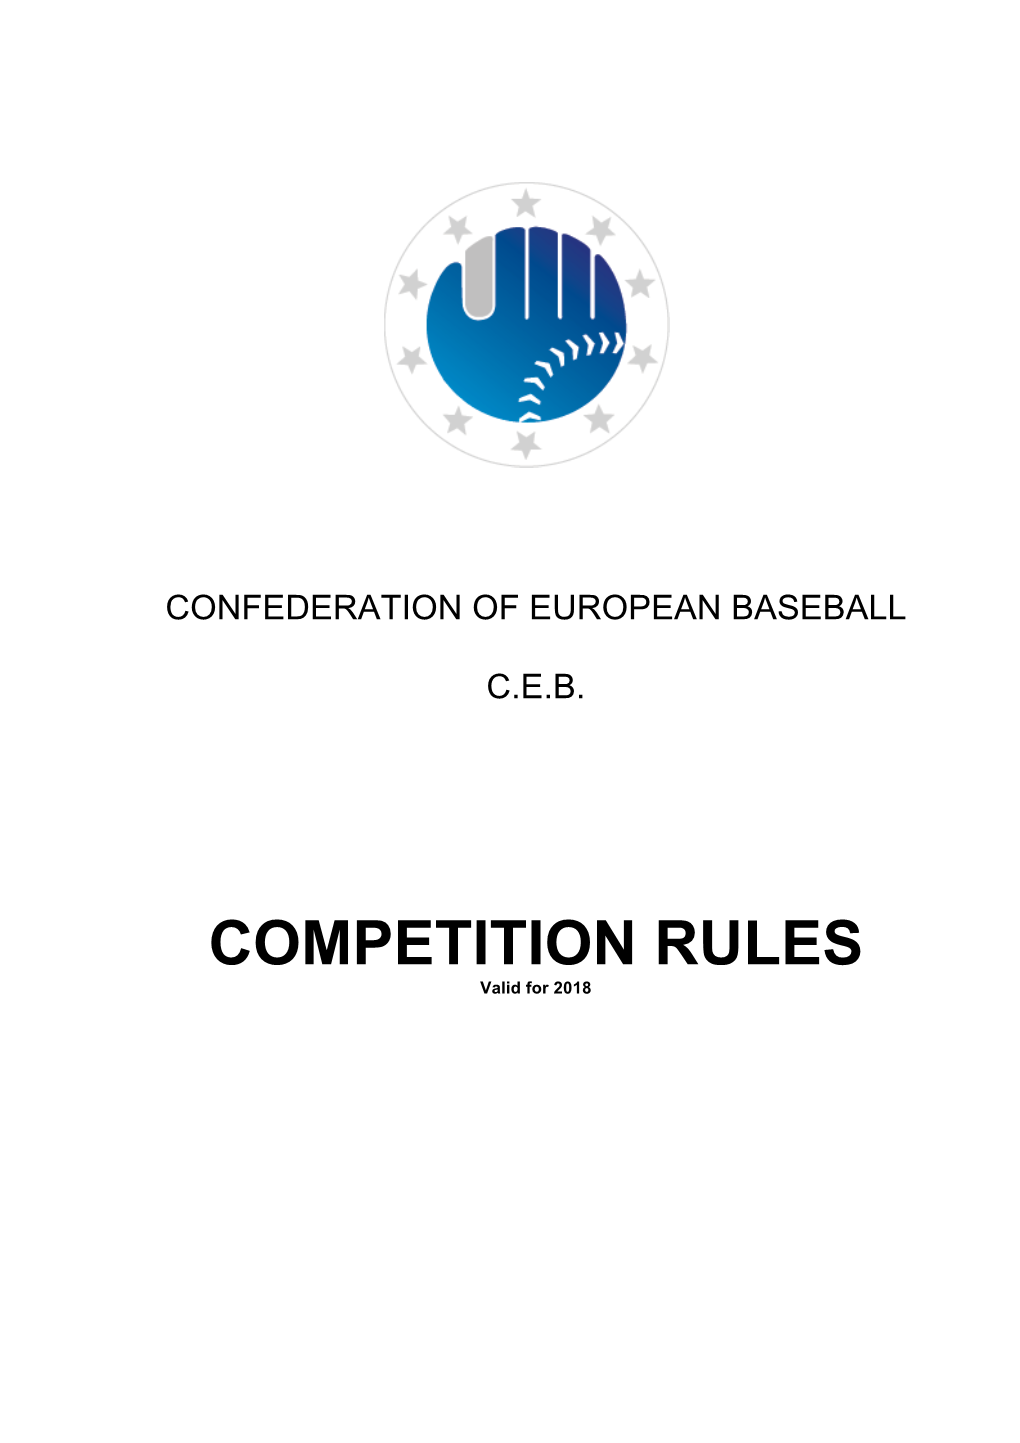 COMPETITION RULES Valid for 2018